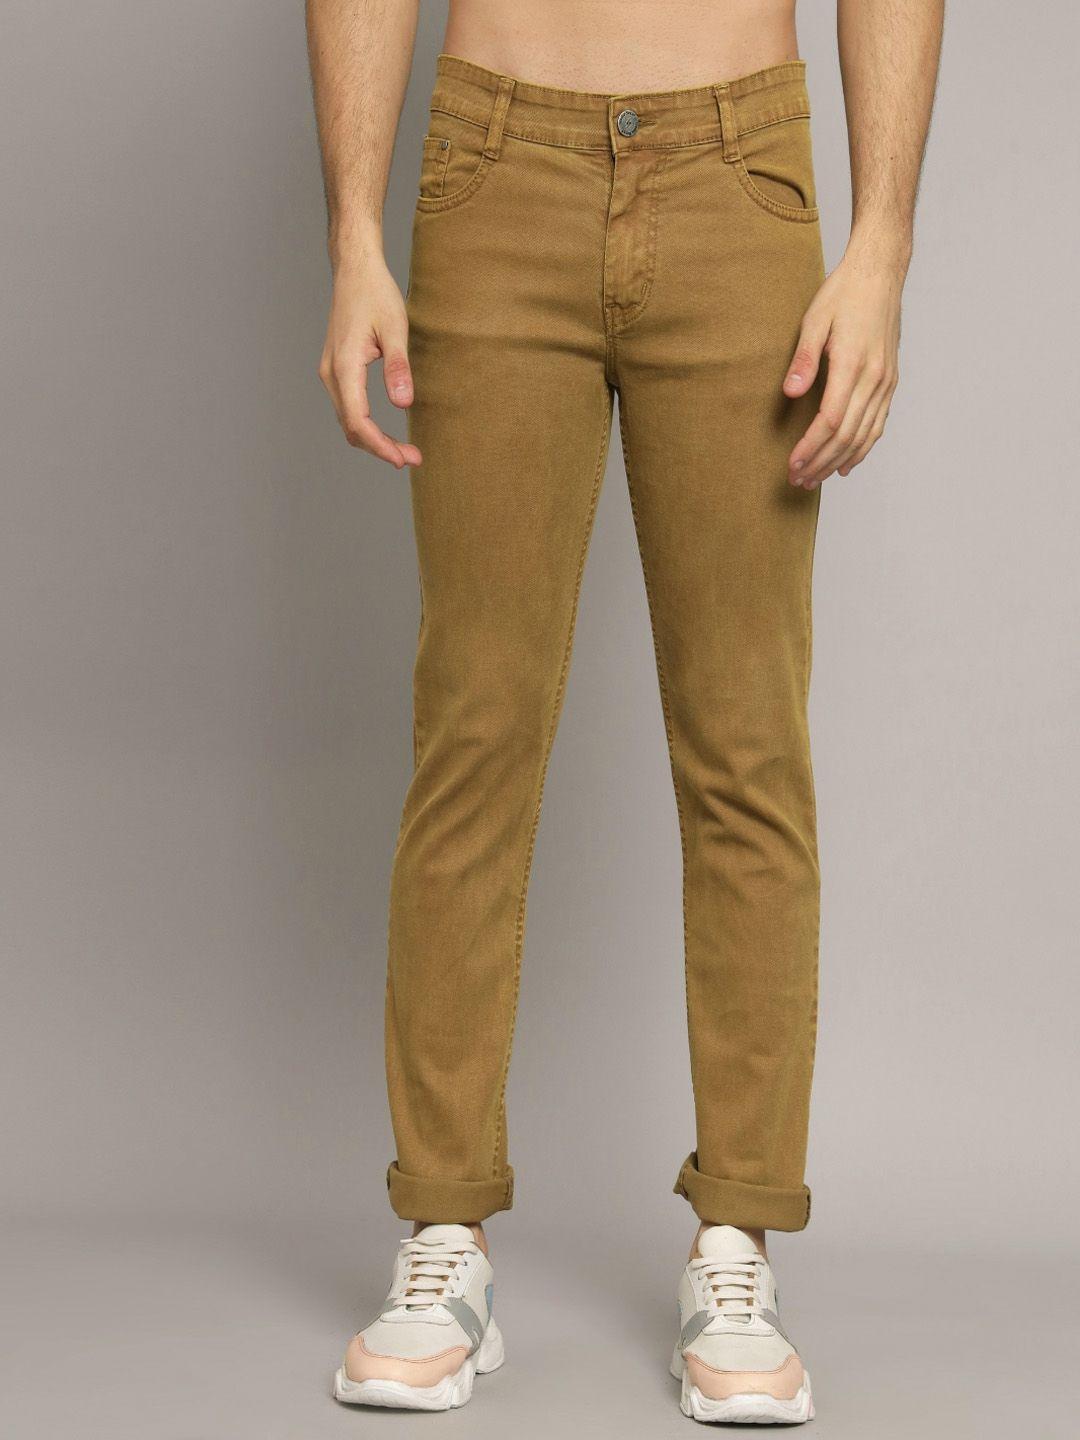 studio nexx men gold-toned relaxed fit stretchable jeans